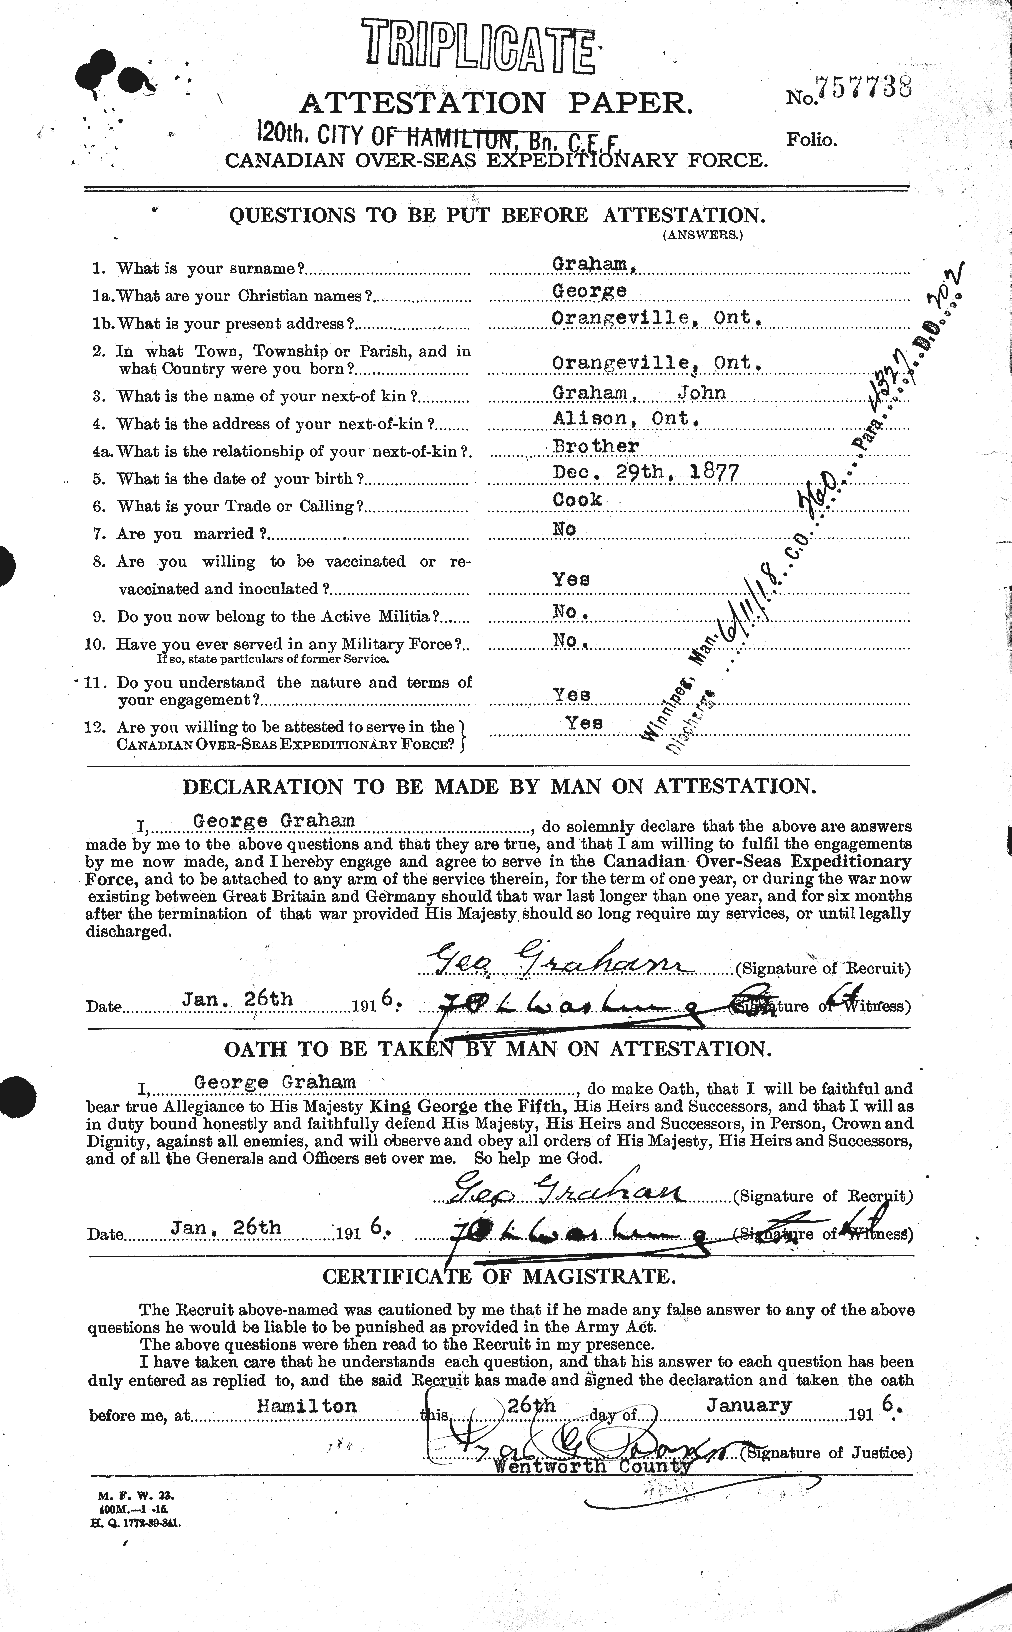 Personnel Records of the First World War - CEF 357625a